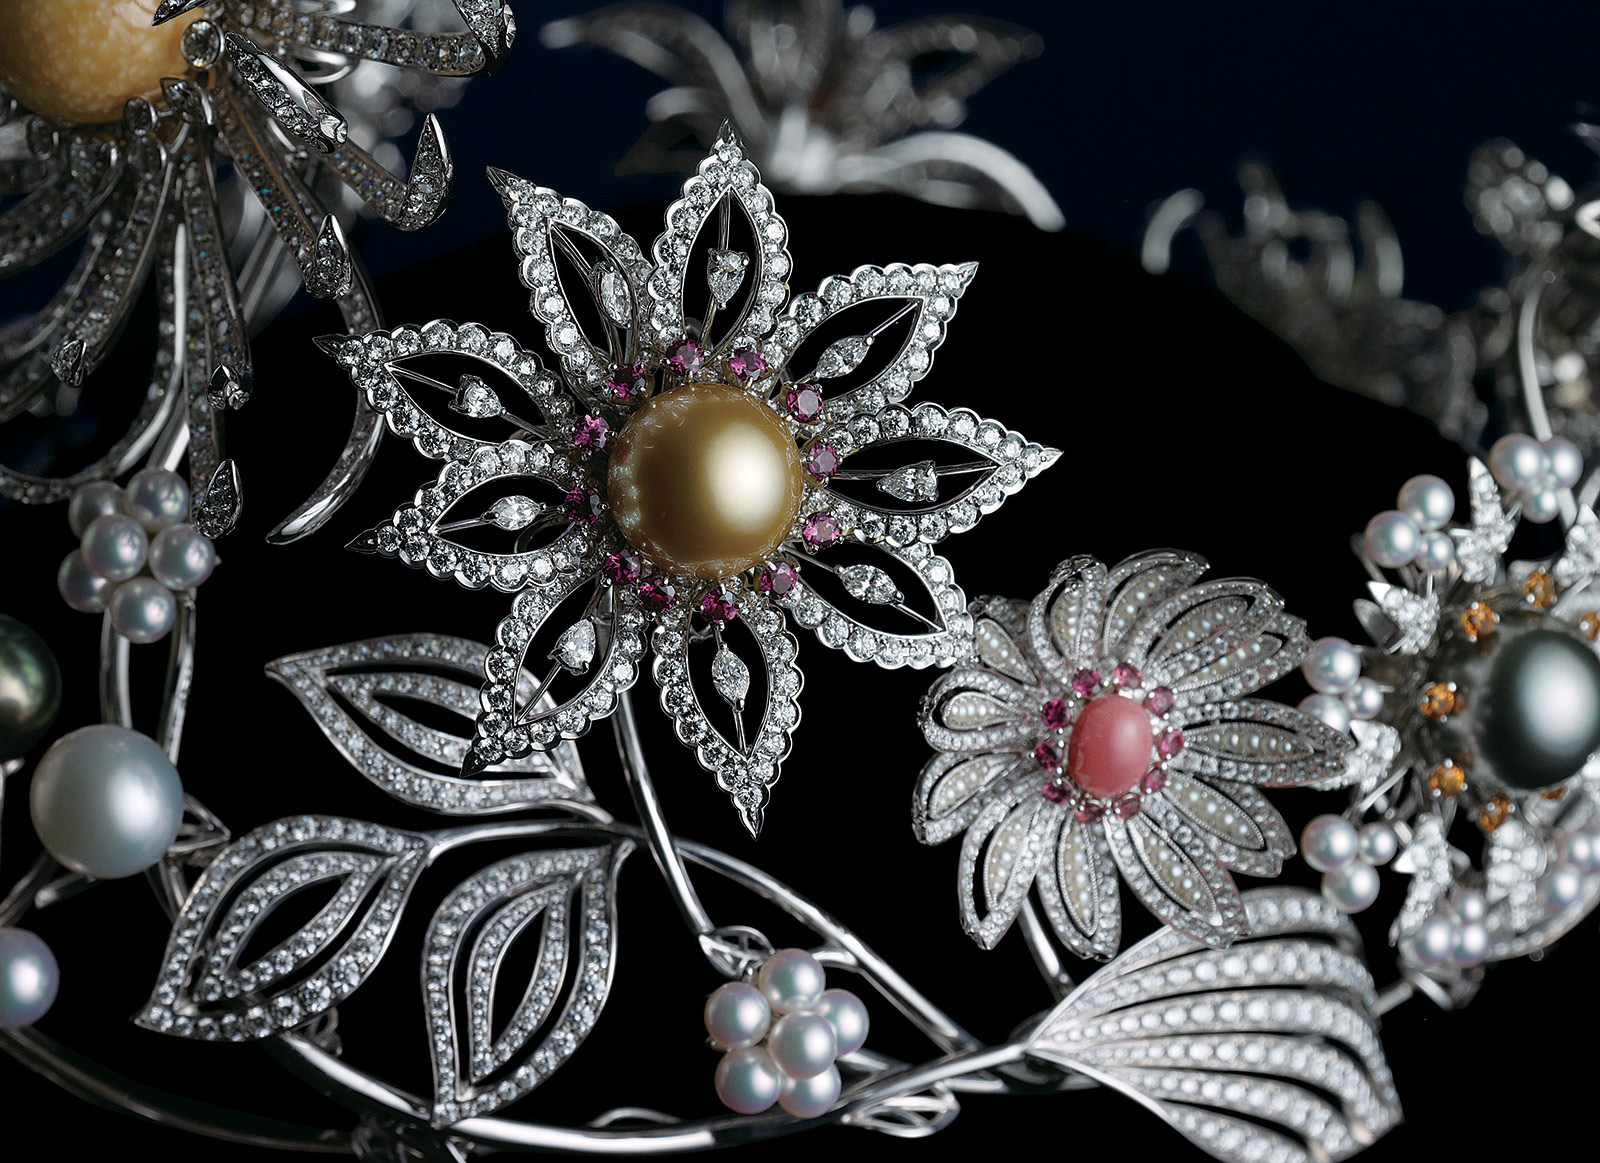 The Mikimoto Dreams & Pearls crown is a bouquet of 12 flowers adorned with rare pearls from different parts of the world, including melo, conch, black, gold and white South Sea pearls, as well as Akoya